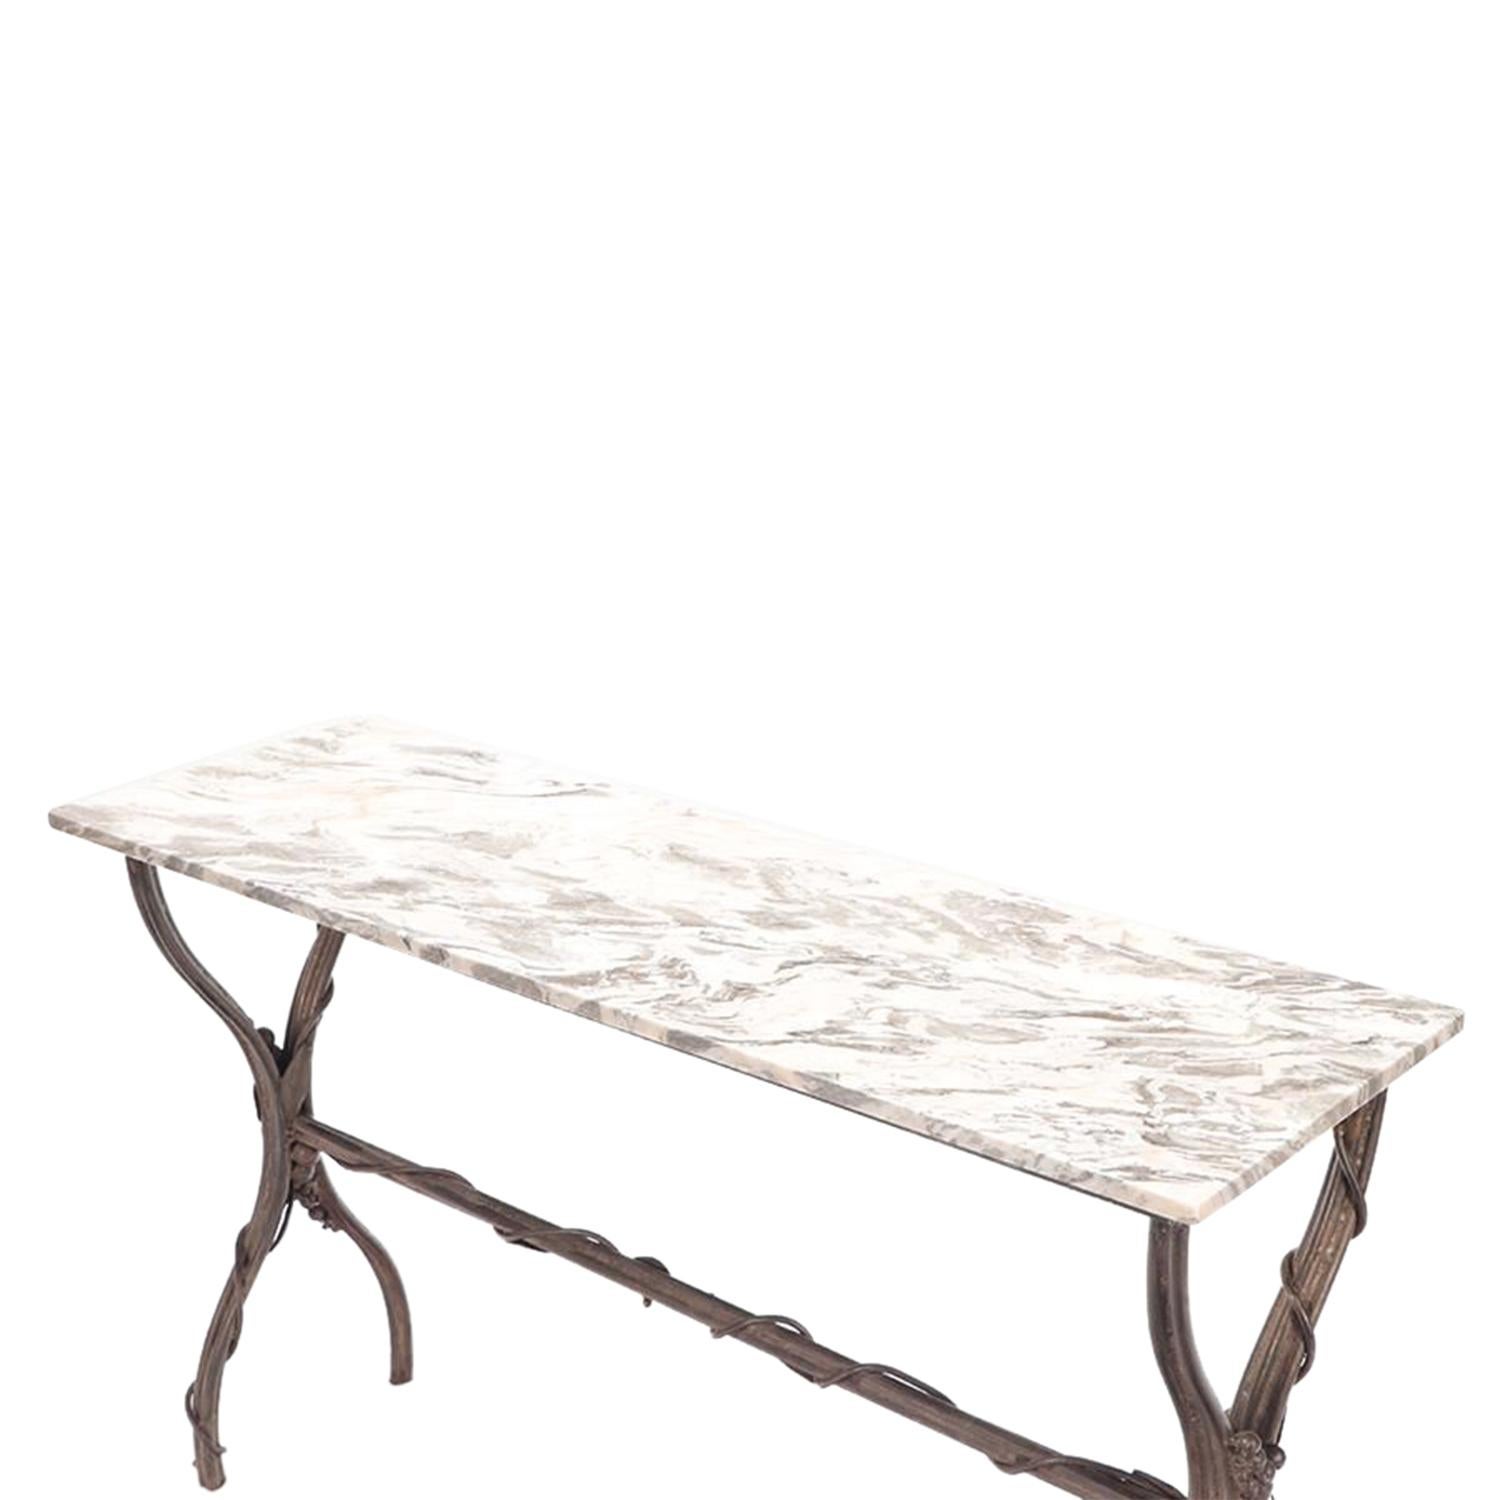 
A vintage Mid-Century modern French freestanding console table made of hand crafted iron attributed to Diego Giacometti, in good condition. The rectangular end table is composed with a white-grey marble top, standing on four arched legs which is